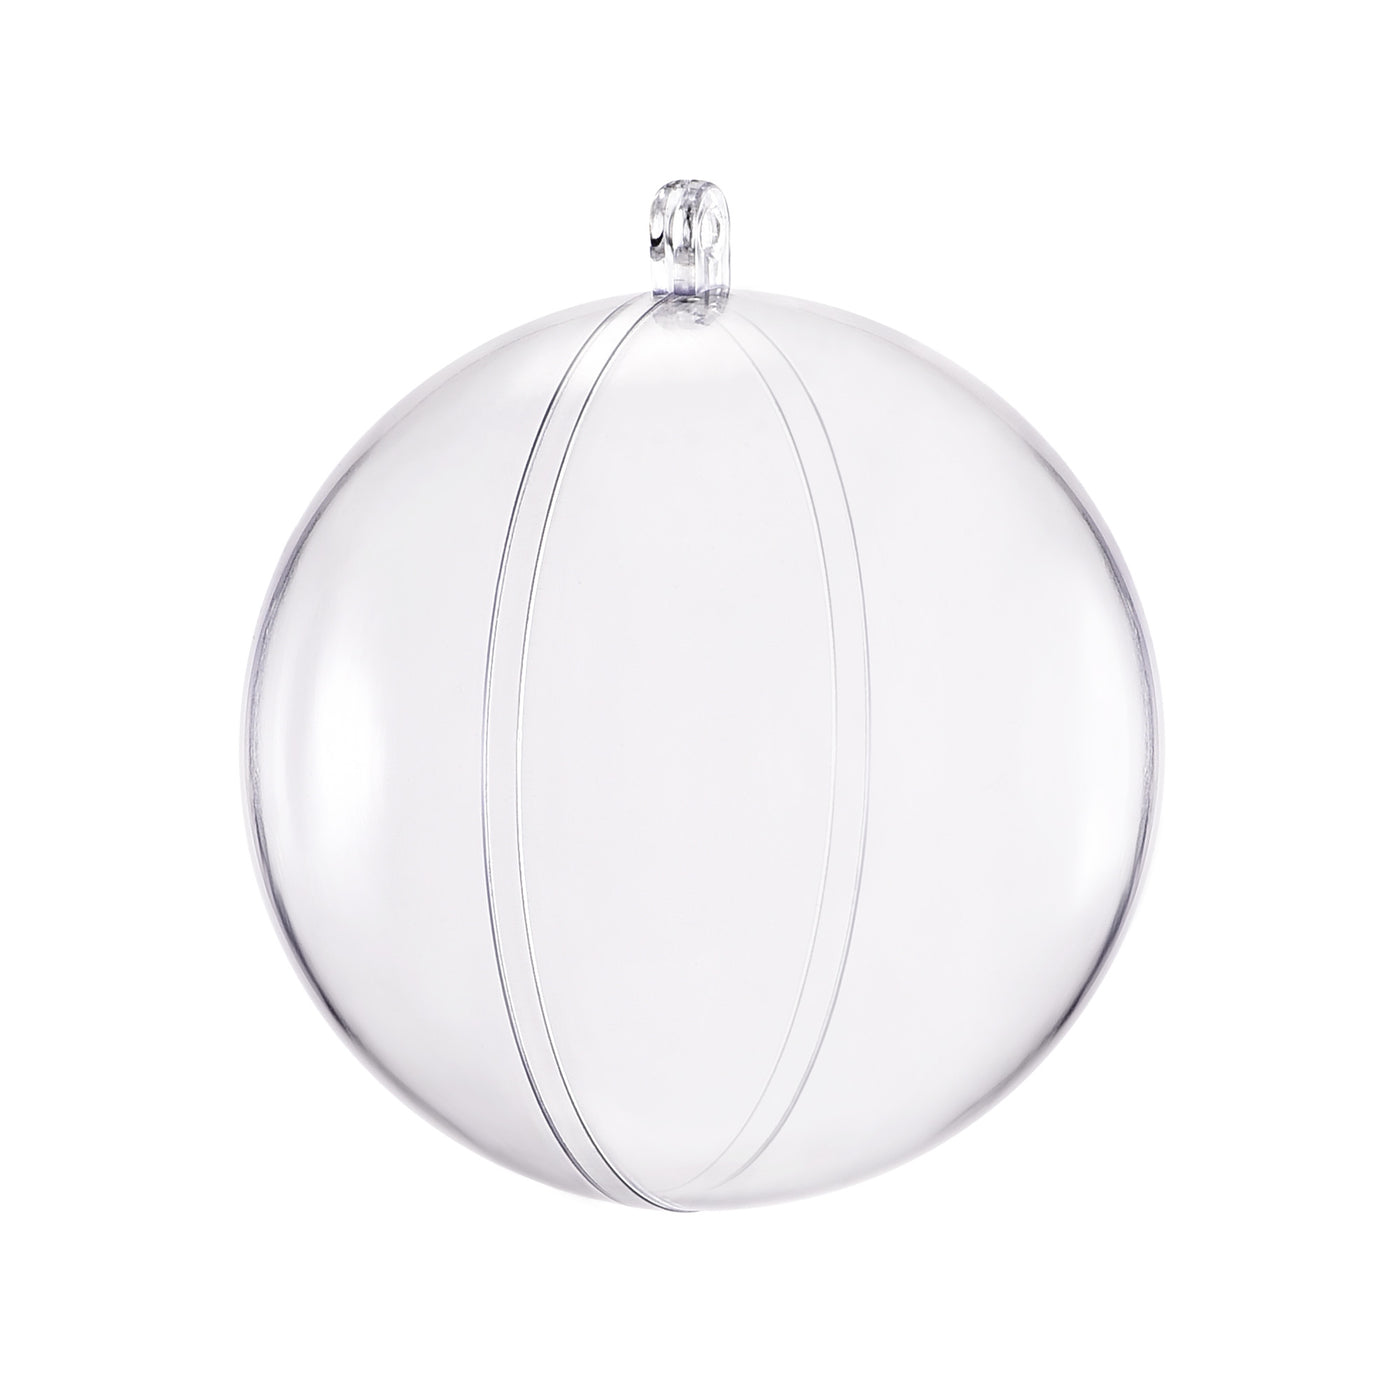 uxcell Uxcell 5pcs 90mm Clear Plastic Ornaments Ball